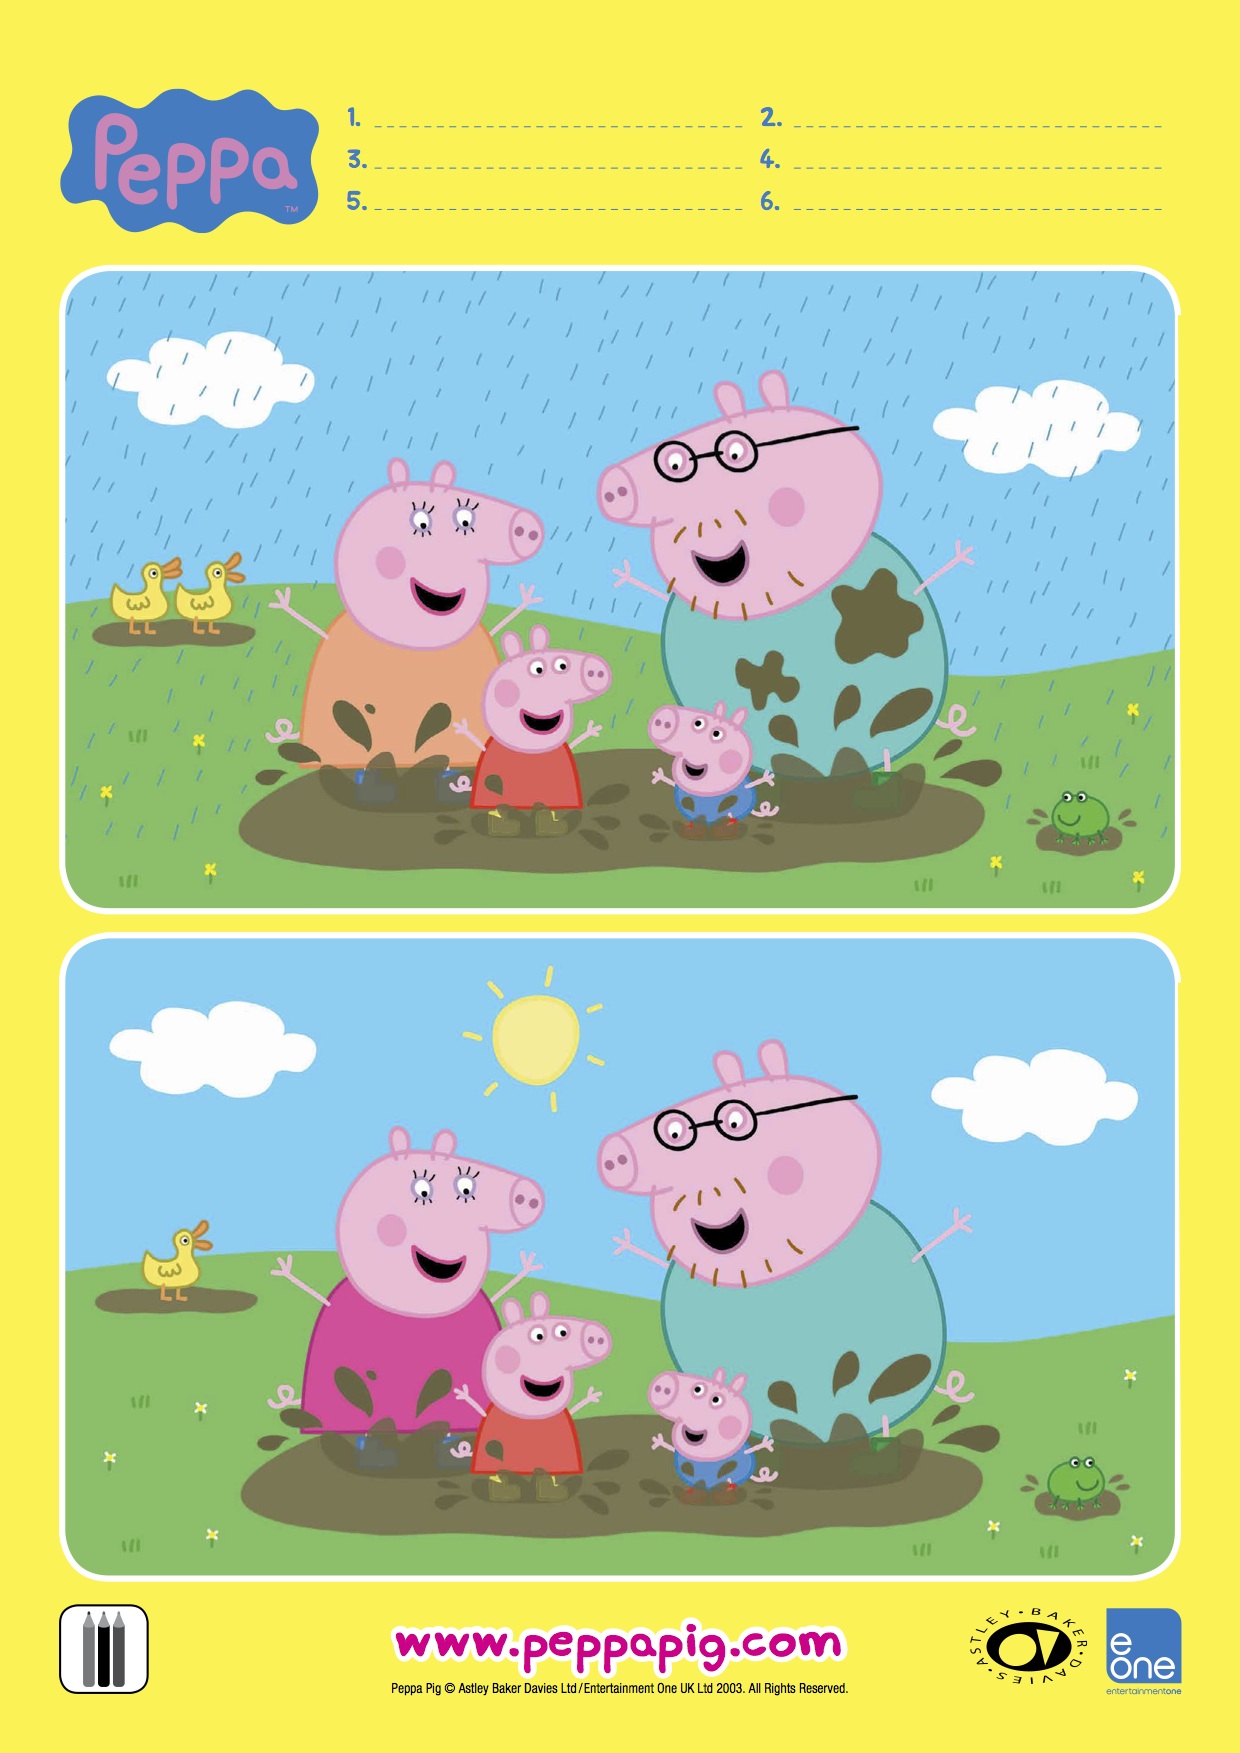 Rainy Day Activities Download These FREE Peppa Pig Activity Sheets Mum s Lounge